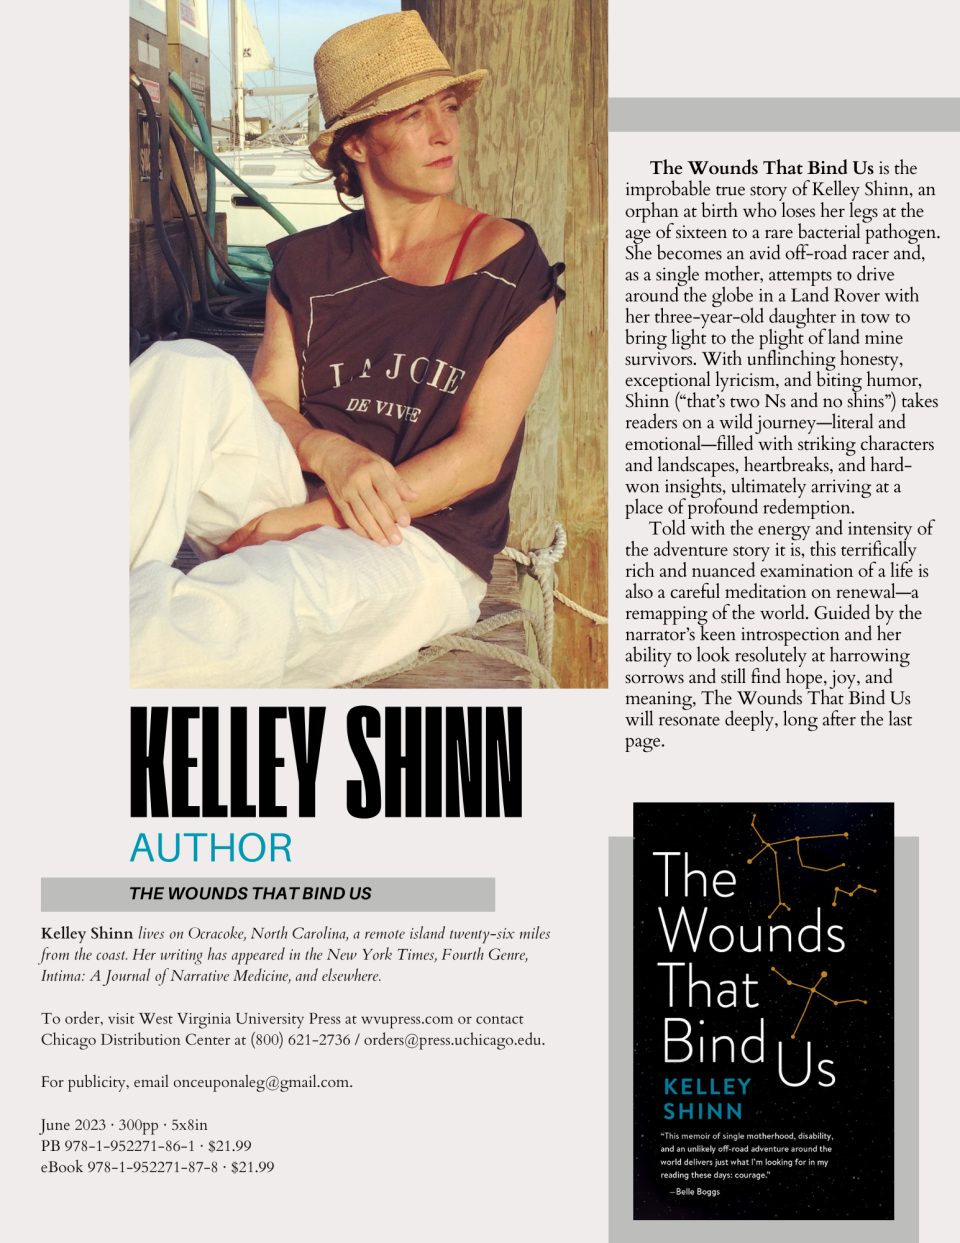 Former Coventry High School student Kelley Shinn returns to the Akron area for a book signing 32 years after a near-fatal bout with bacterial meningitis.